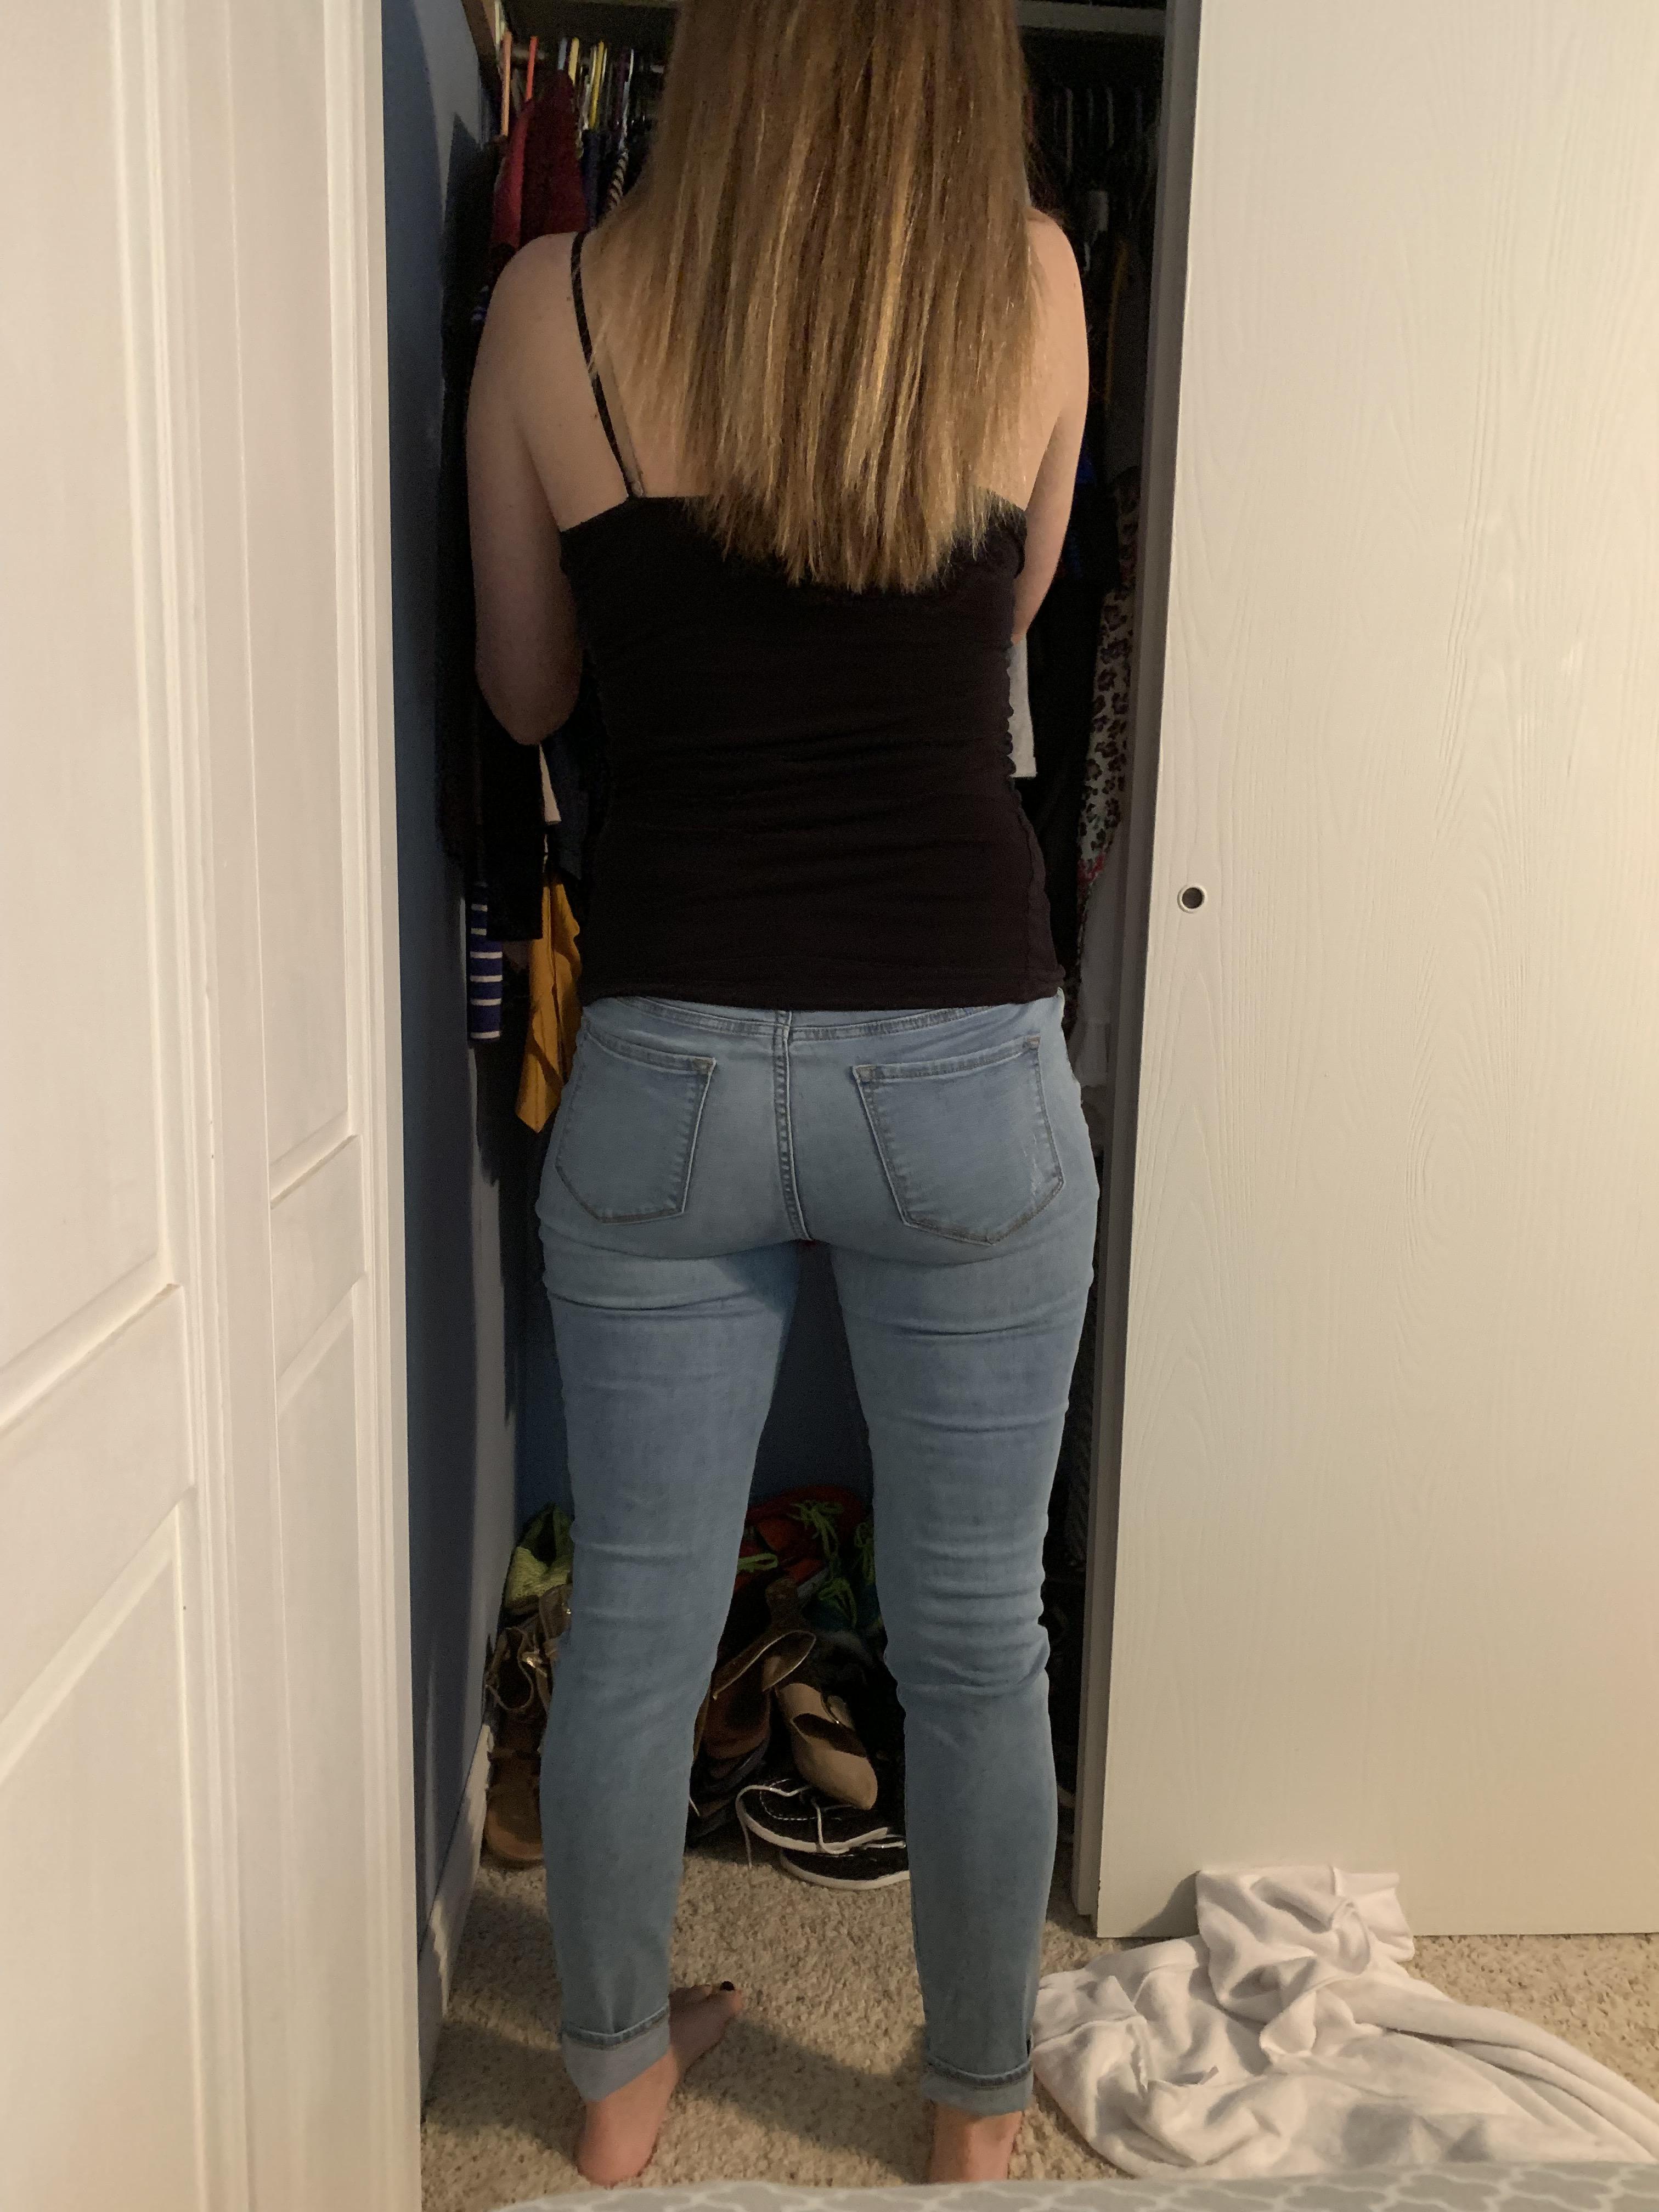 My Wifes Ass Pics